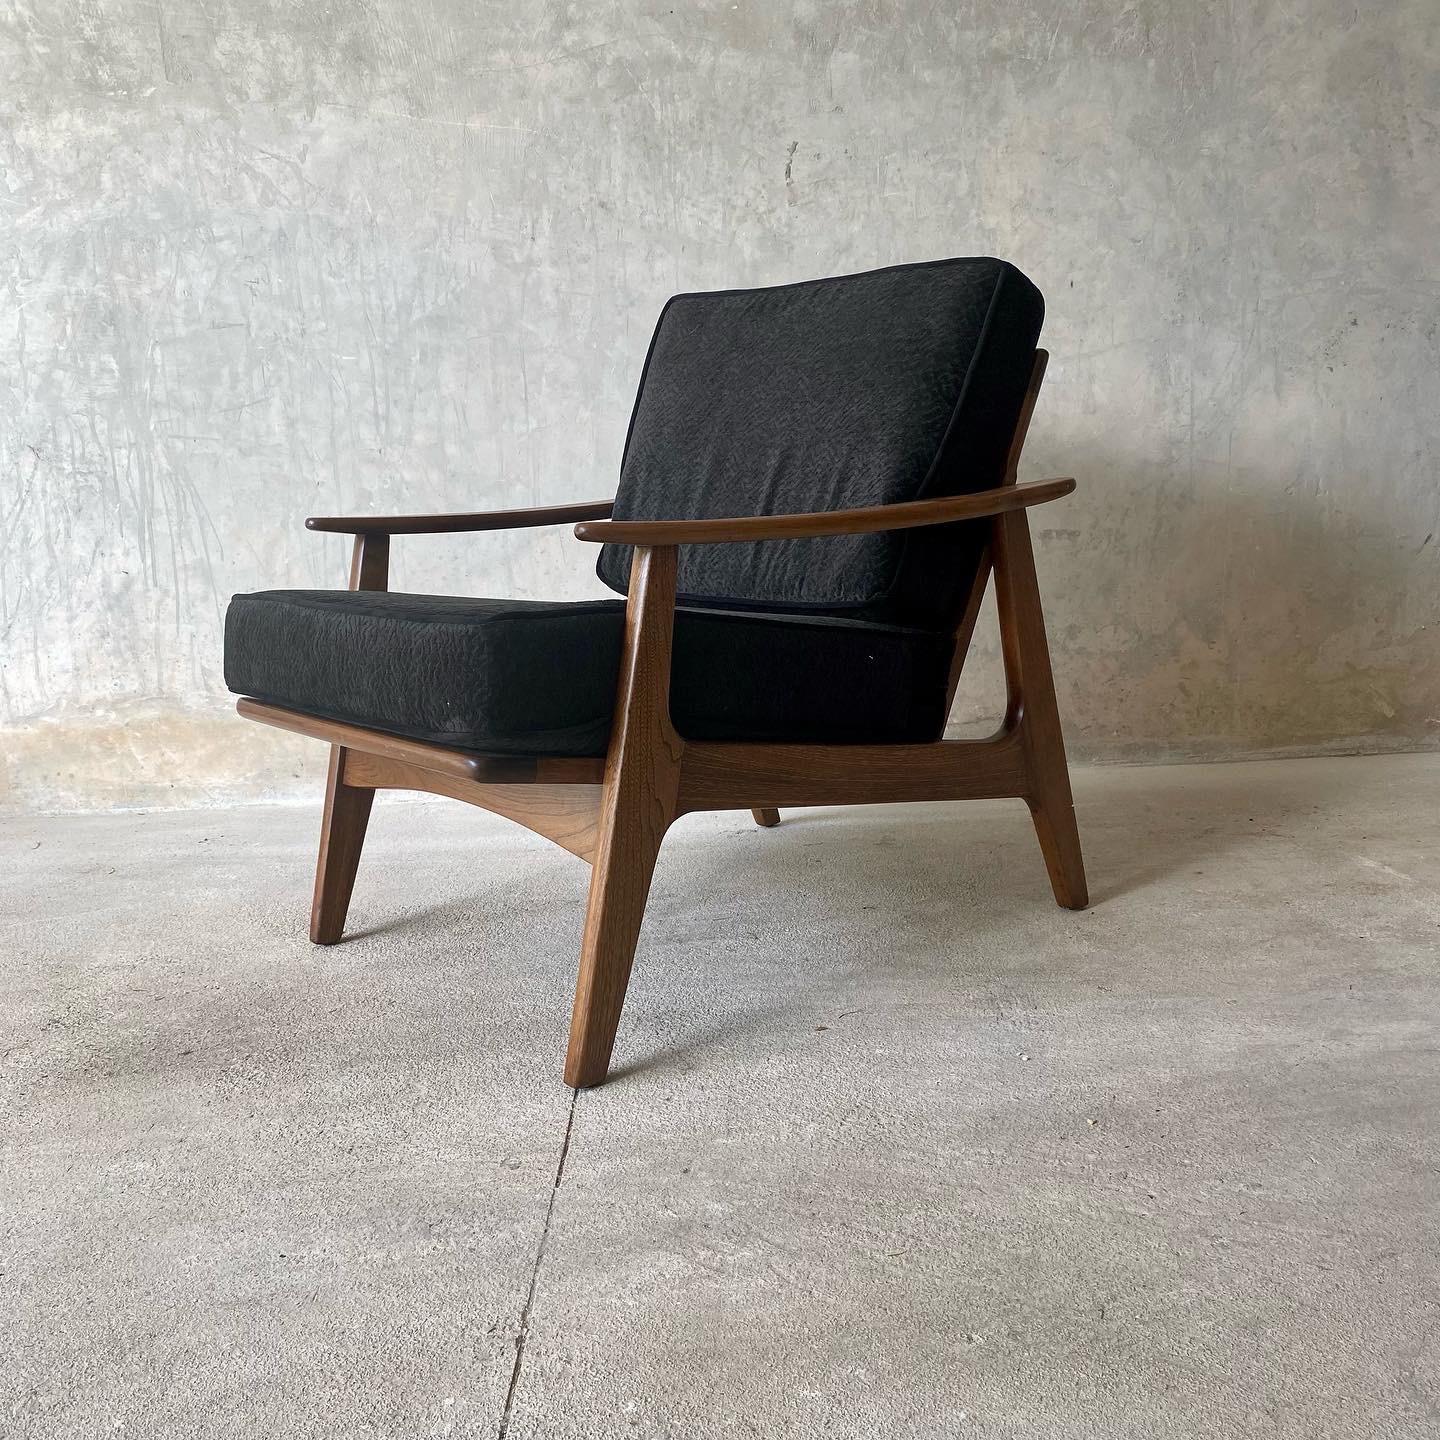 Mid-Century Modern Lounge Chair Mexican Midcentury by “Malinche“, 1950s